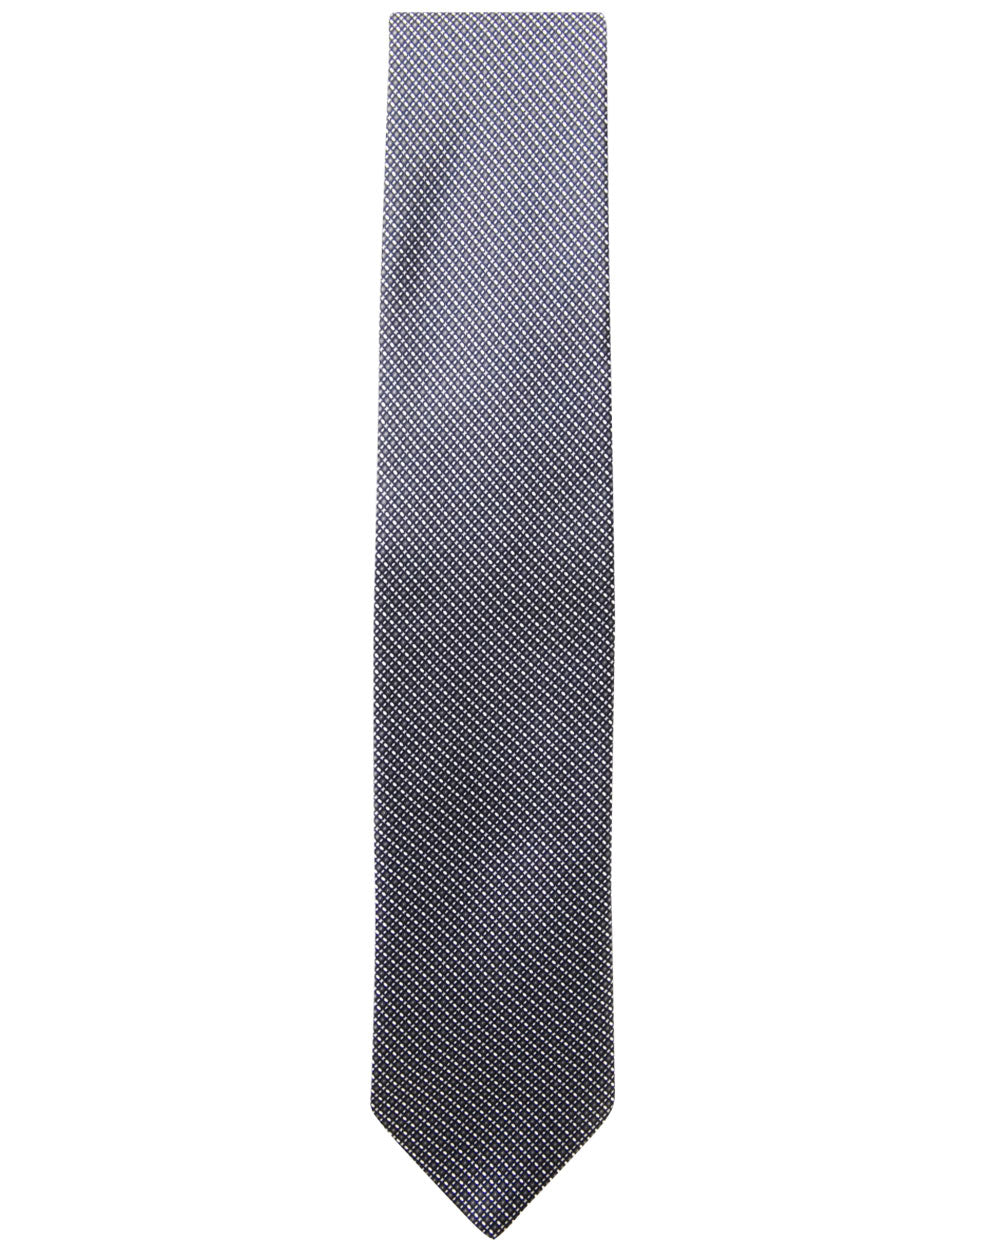 Light Grey and Navy Micropatterned Tie